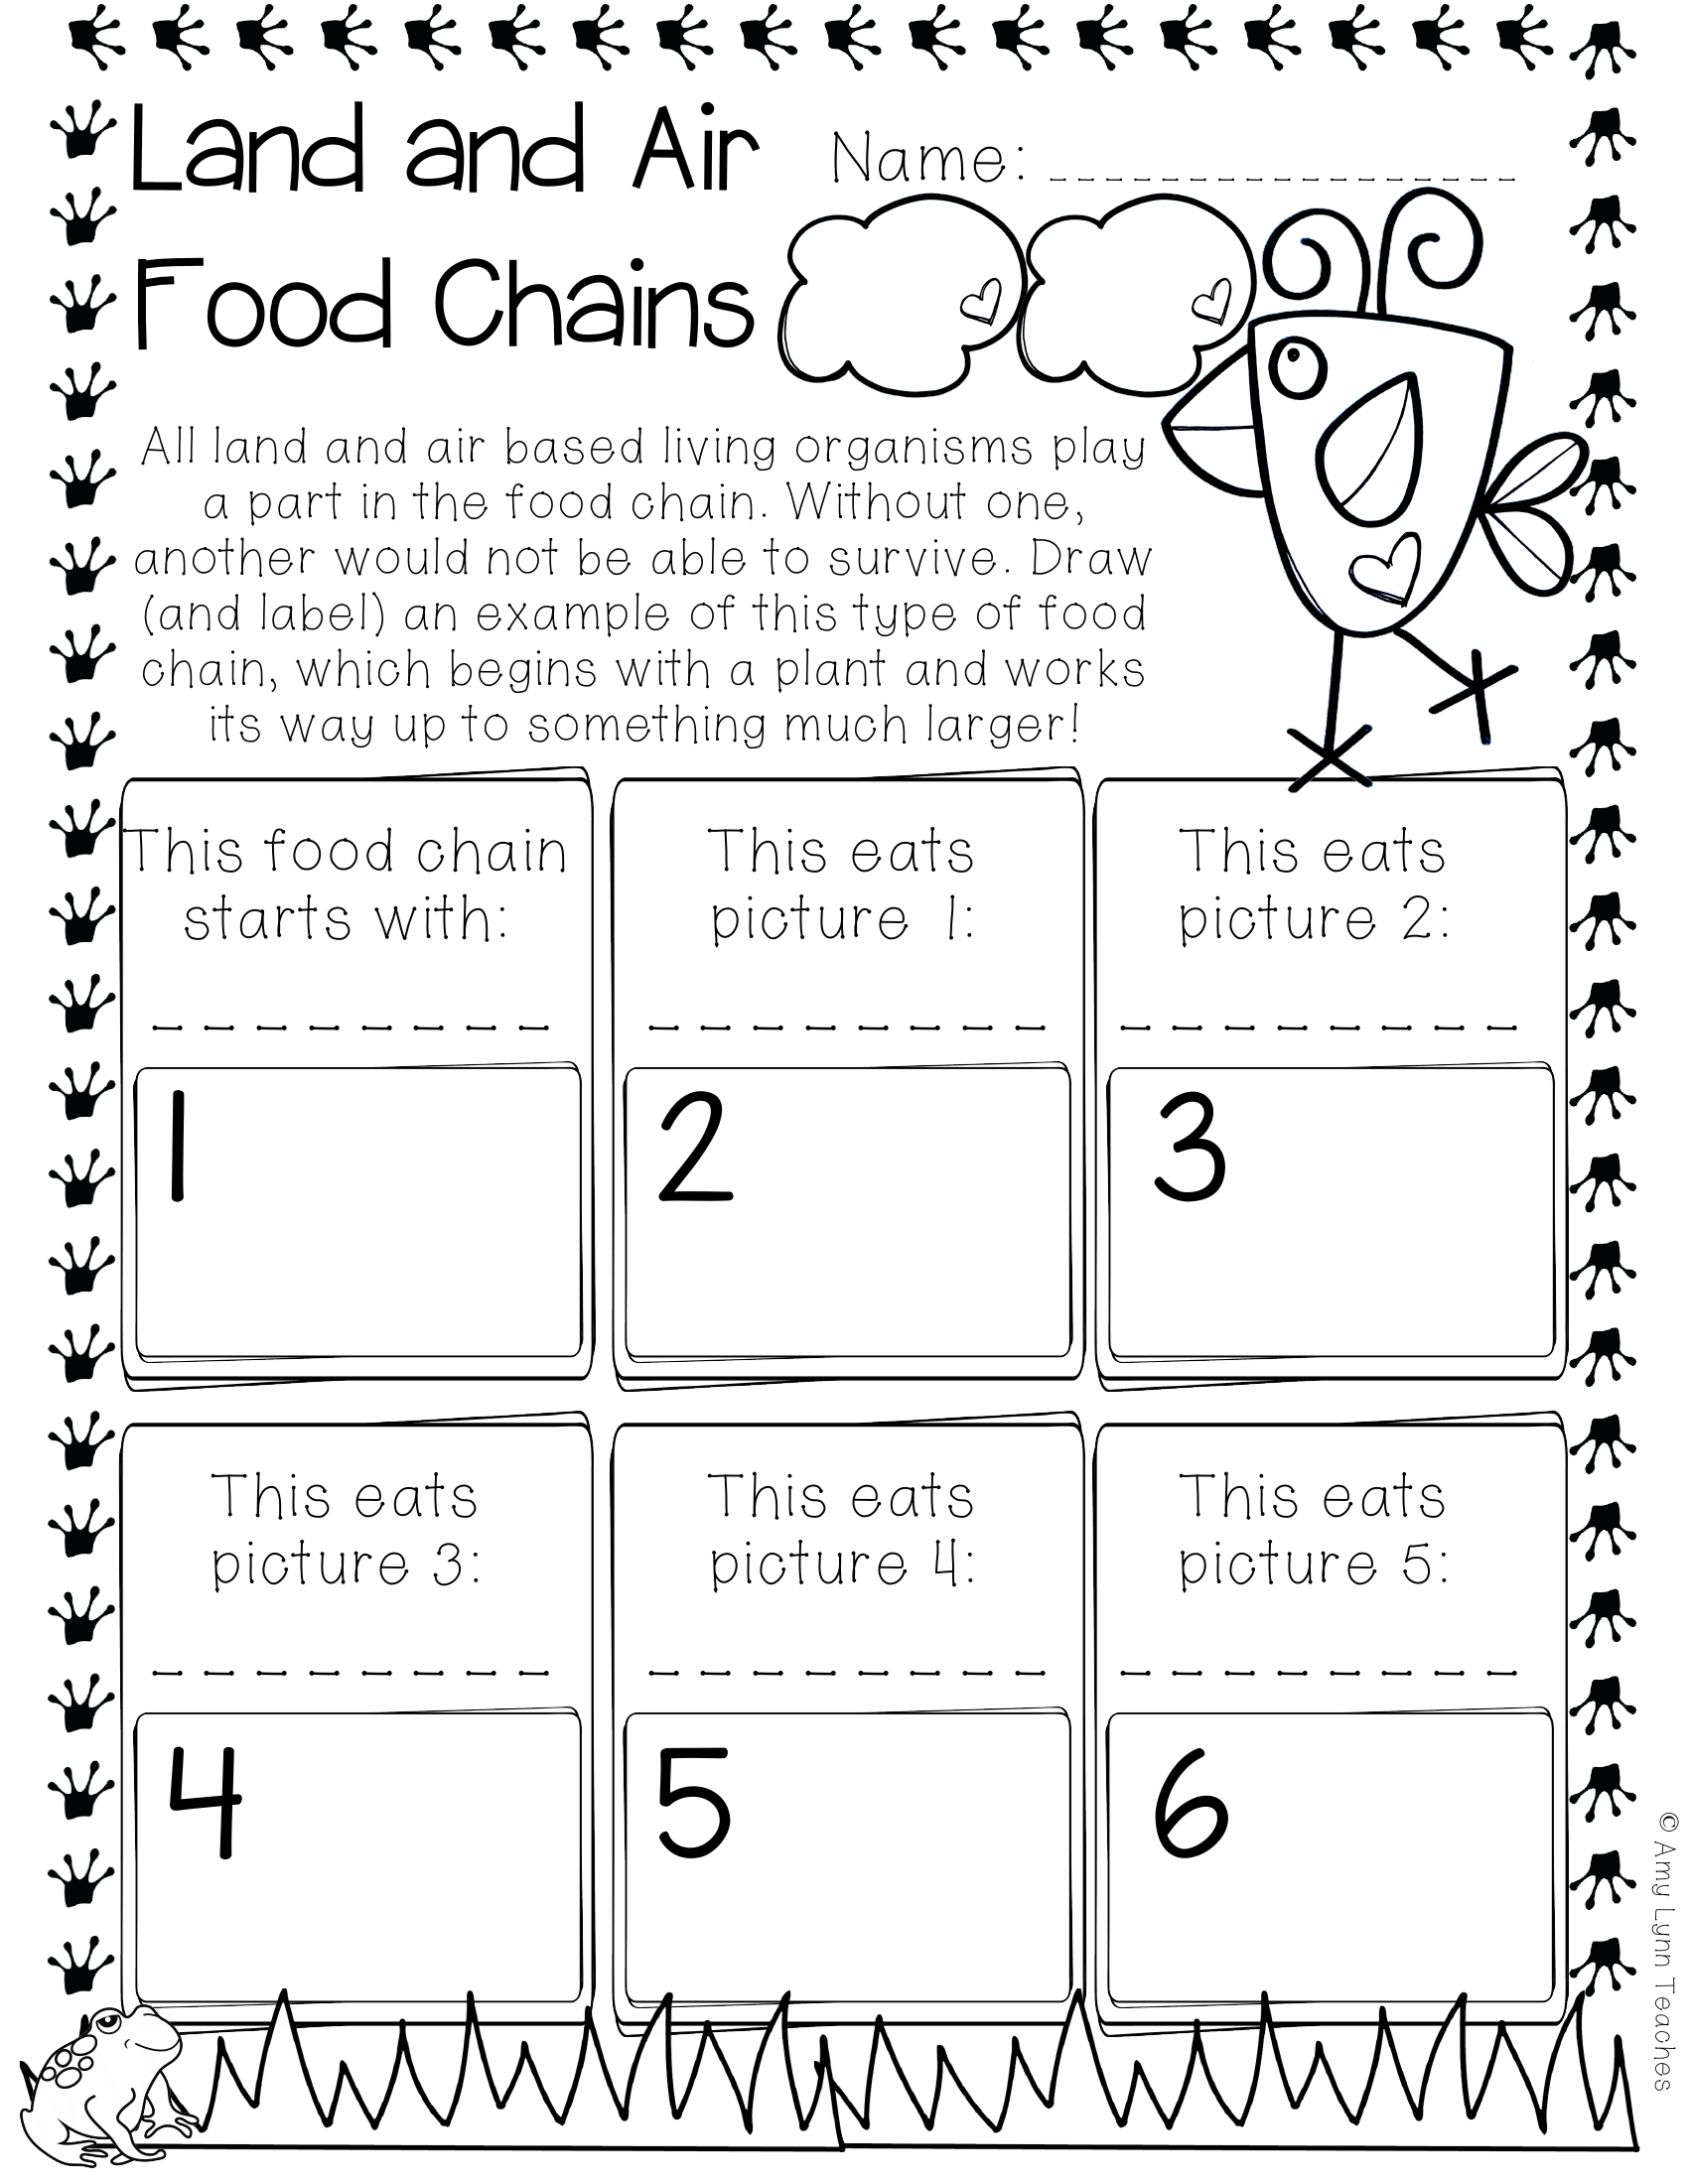 Land and Air Food Chains | Worksheet Zone